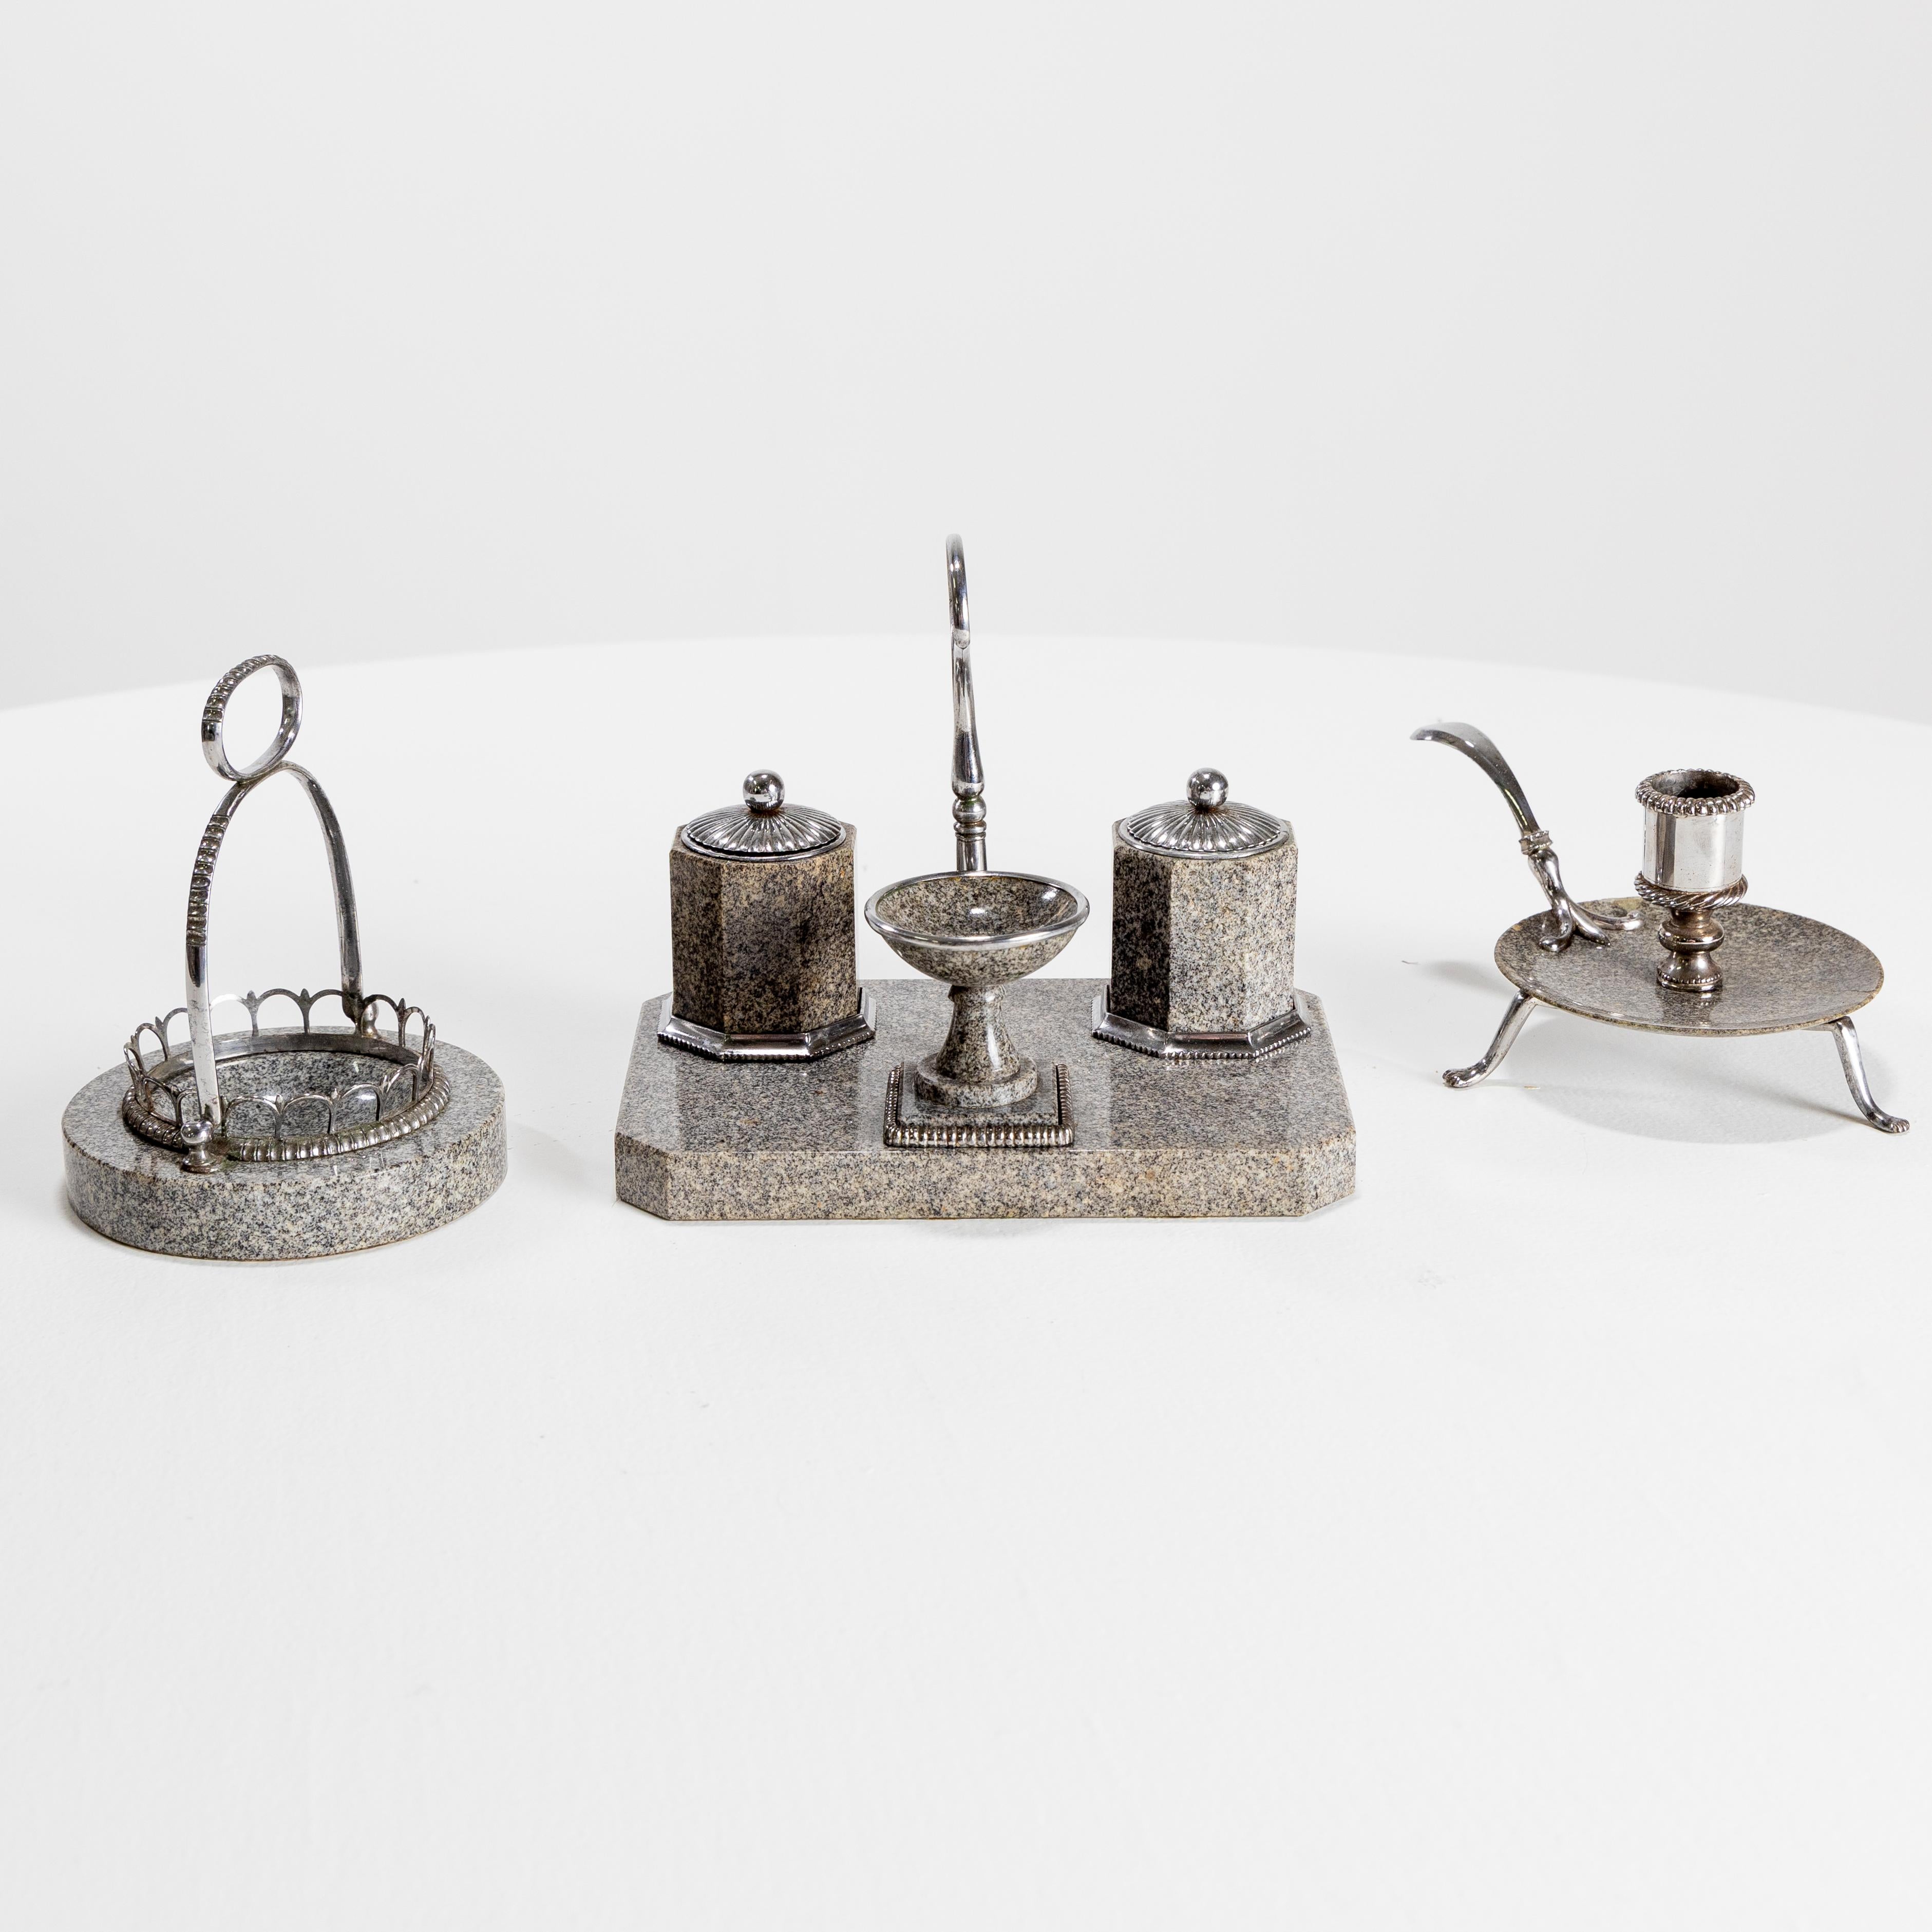 Seven-piece desk set from Vienna in granite with polished steel mounts.